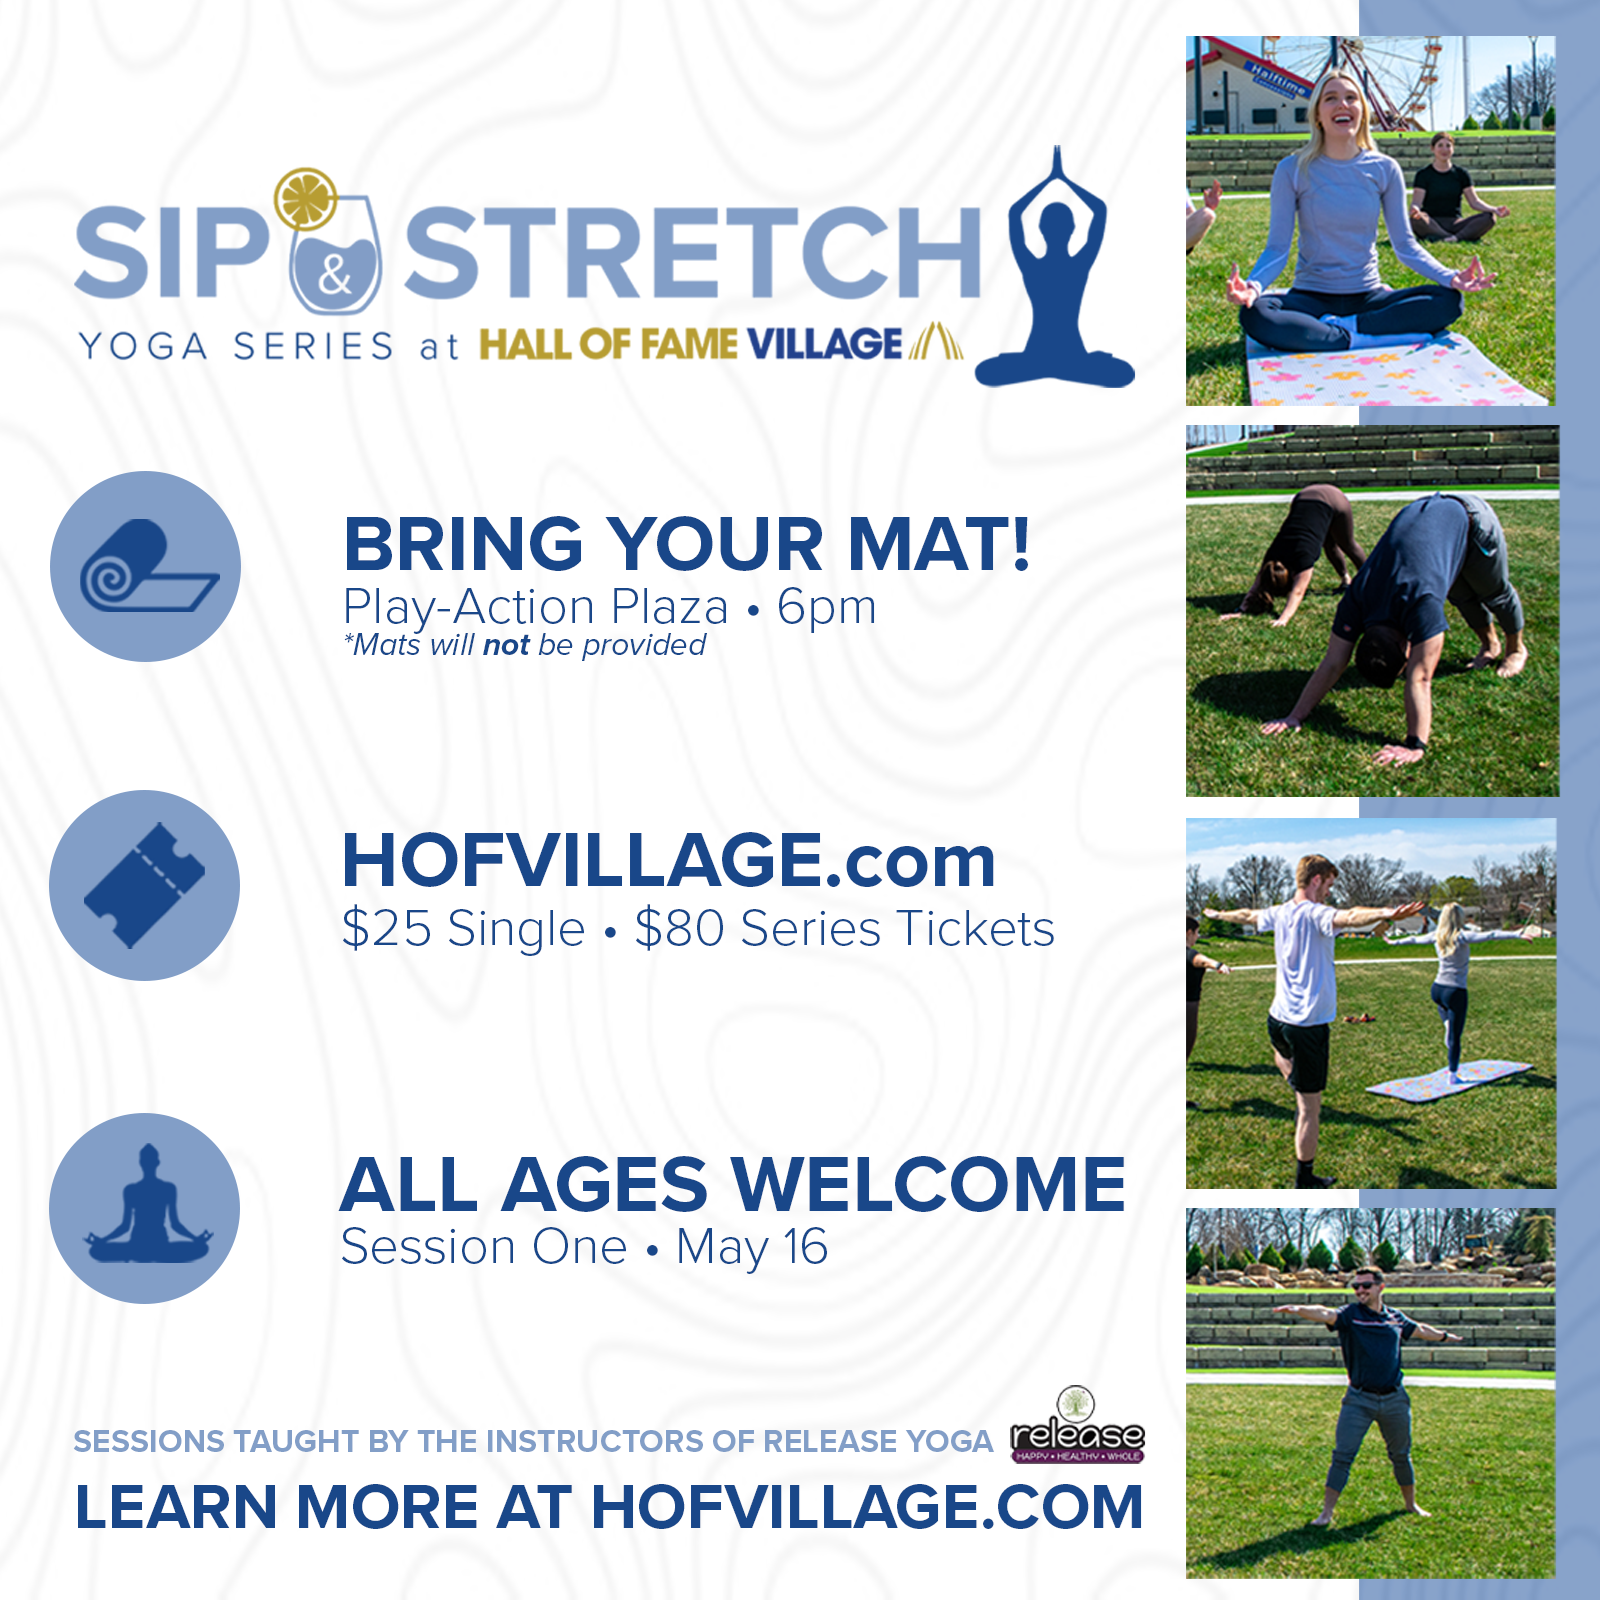 Sip and Stretch Yoga Series